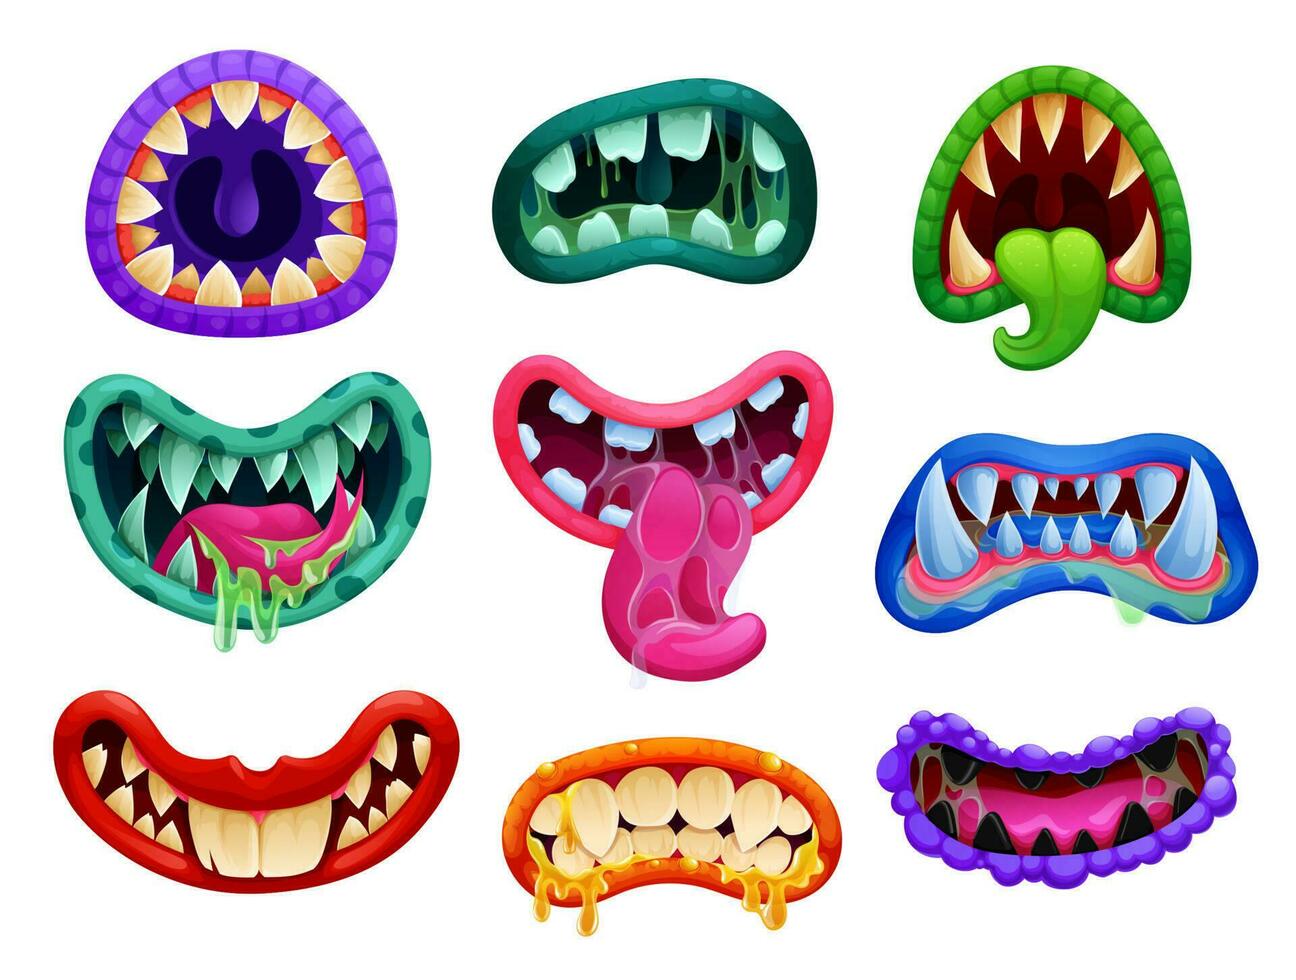 Cartoon Halloween monster jaws mouth with teeth vector